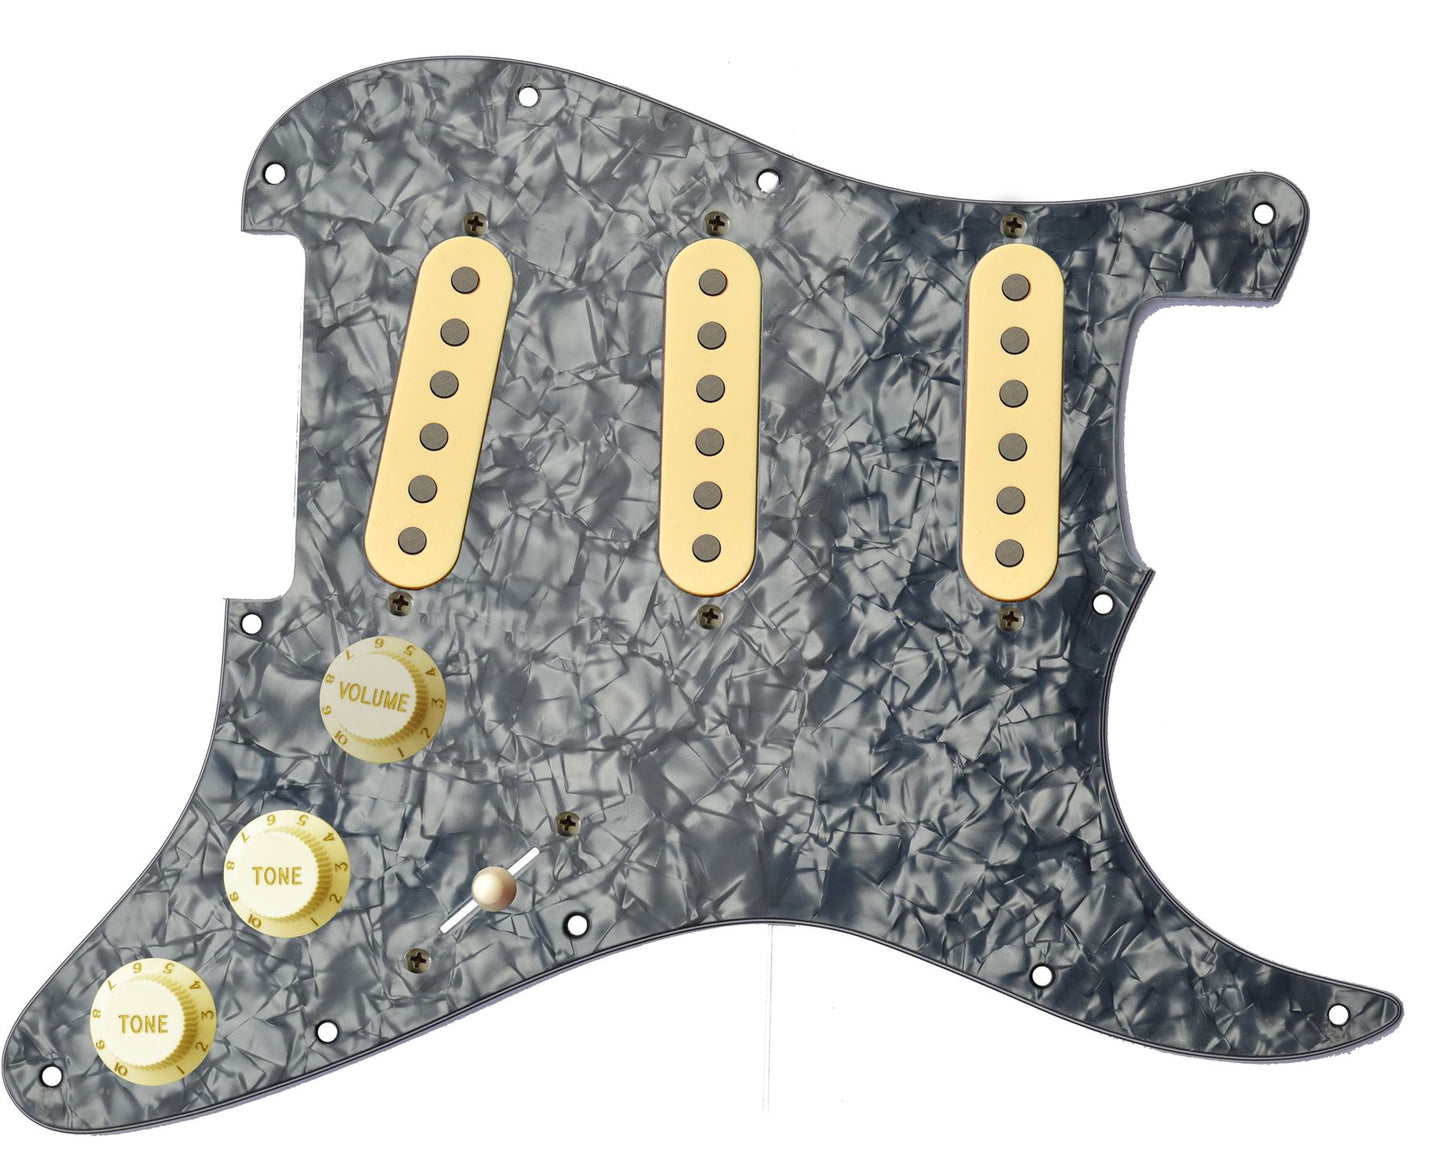 Tonerider Deluxe Tonerider Classic Blues Fully Loaded Stratocaster Compatible Scratchplate